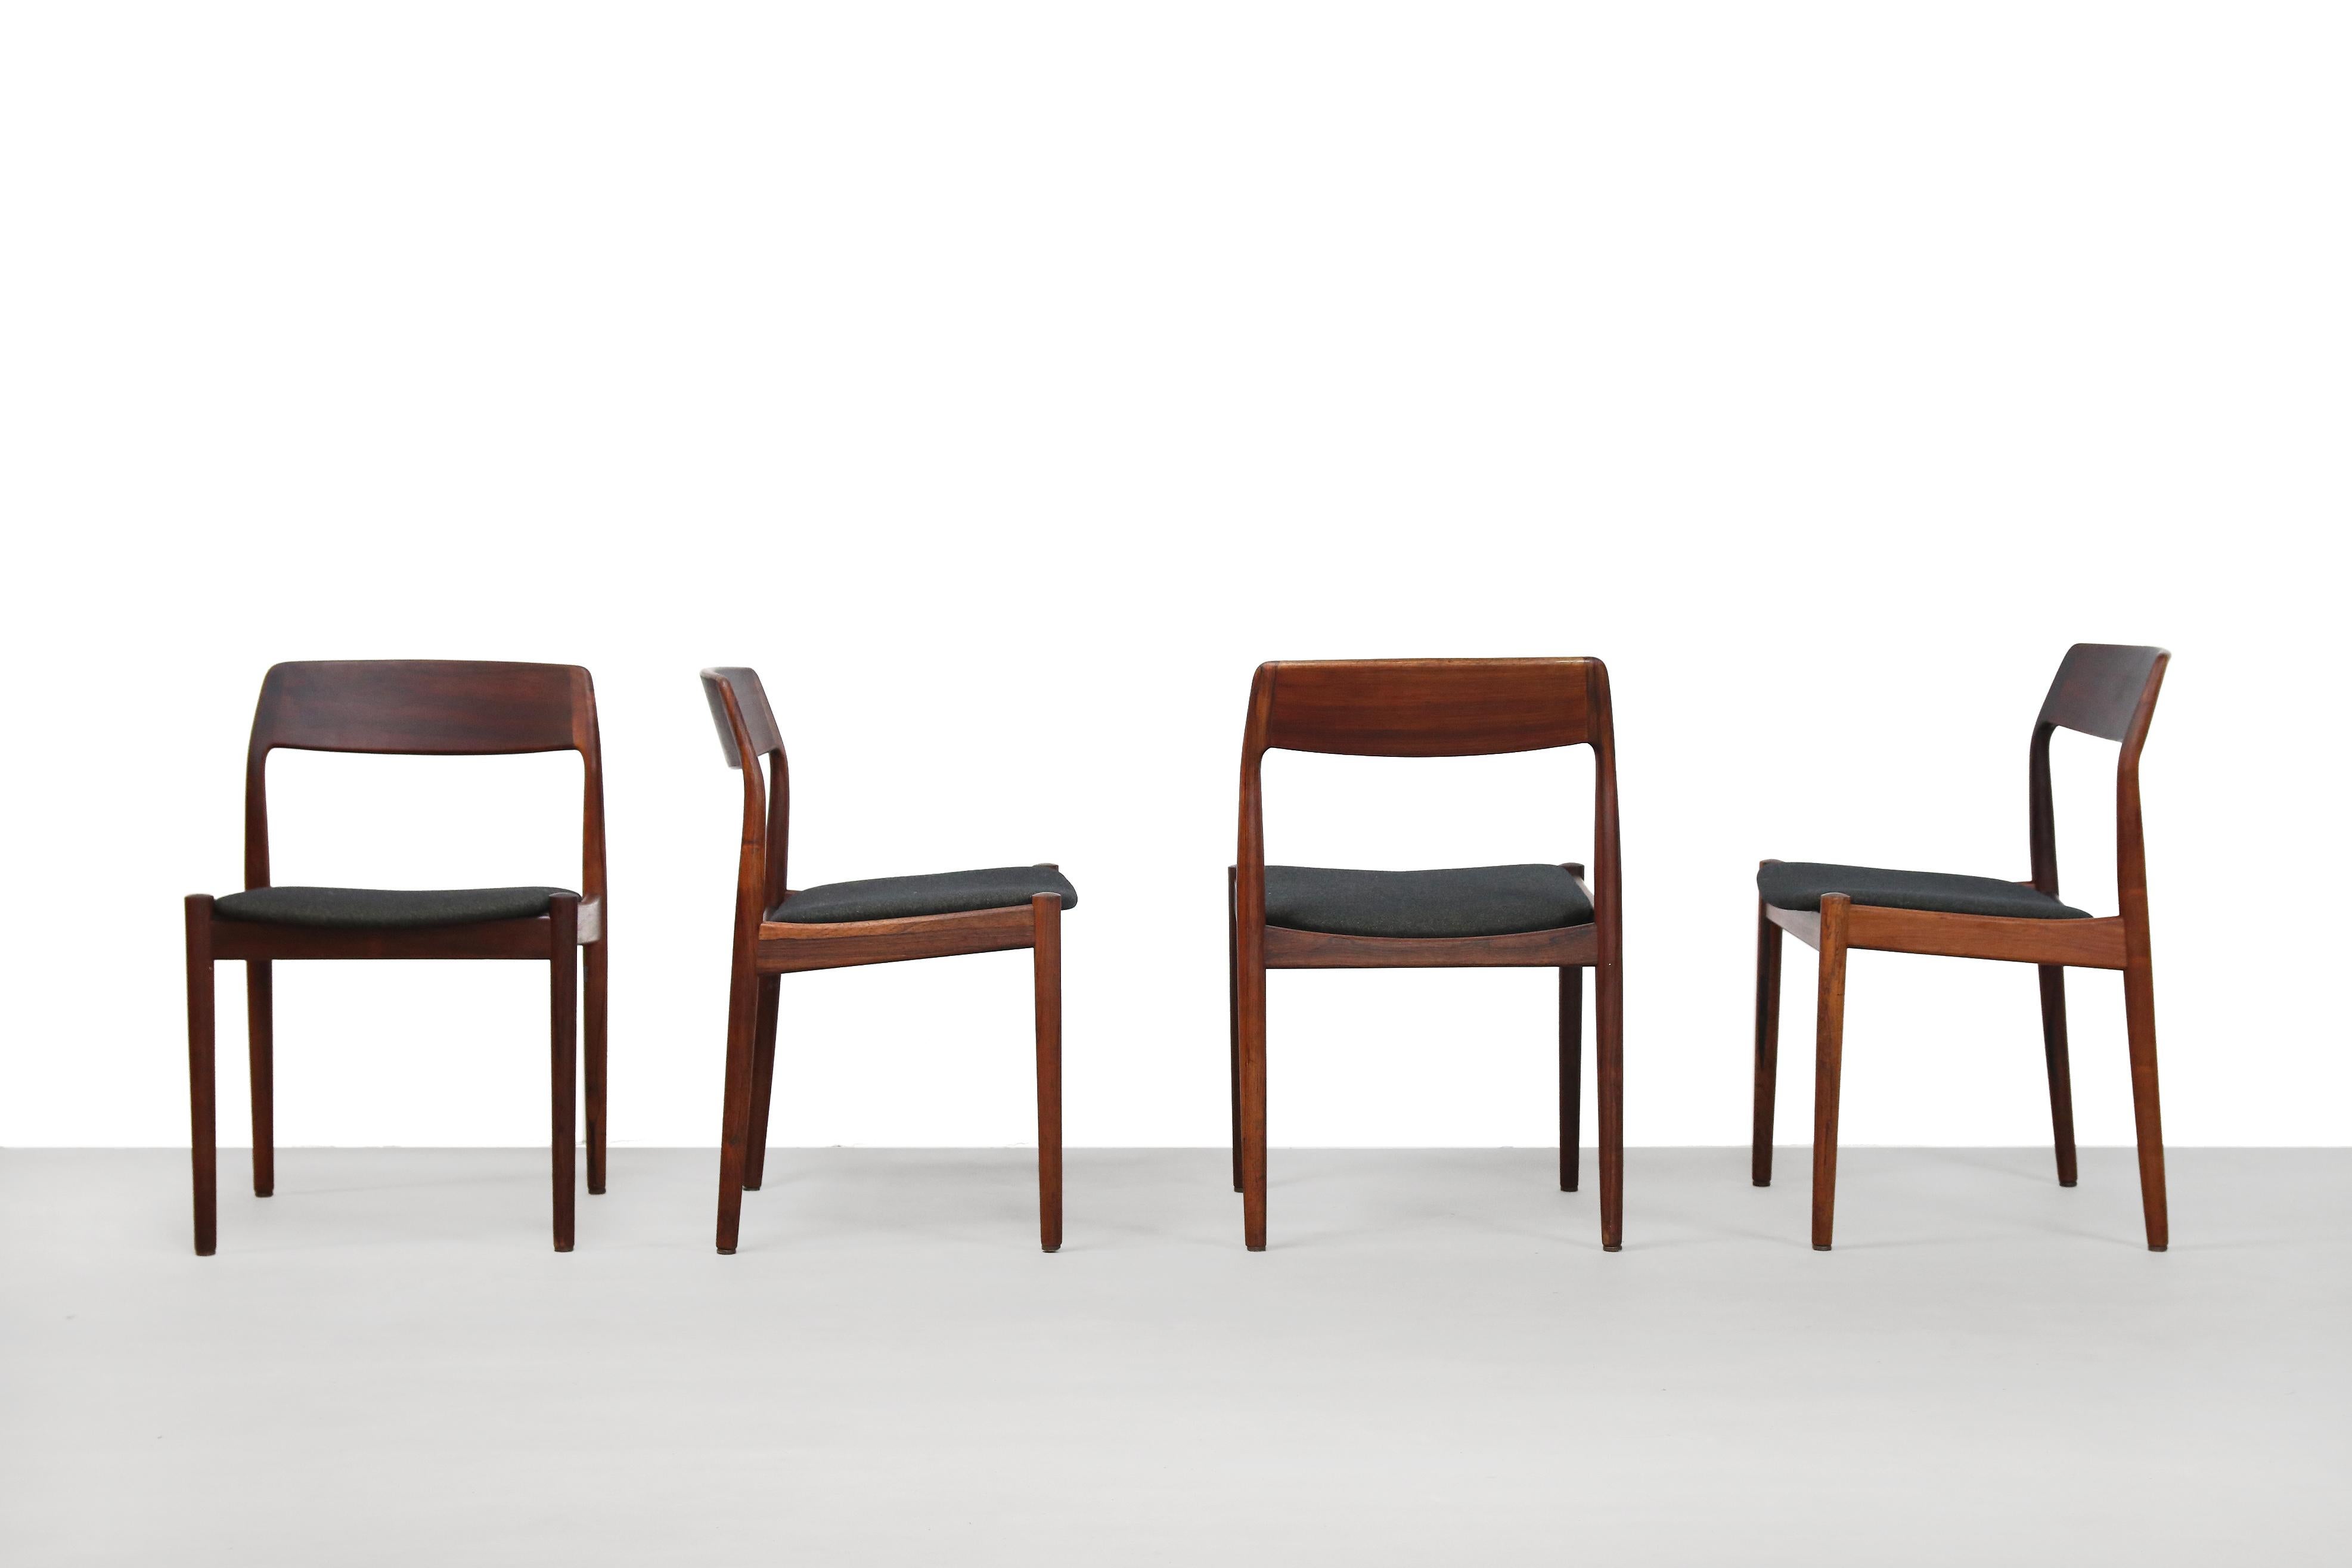 Exclusive complete dining set consisting of 4 rosewood dining chairs designed by Johannes Nørgaard from Denmark. With a rosewood frame and upholstered in a dark green woolen furniture fabric. The chairs are beautiful in their in simplicity and very